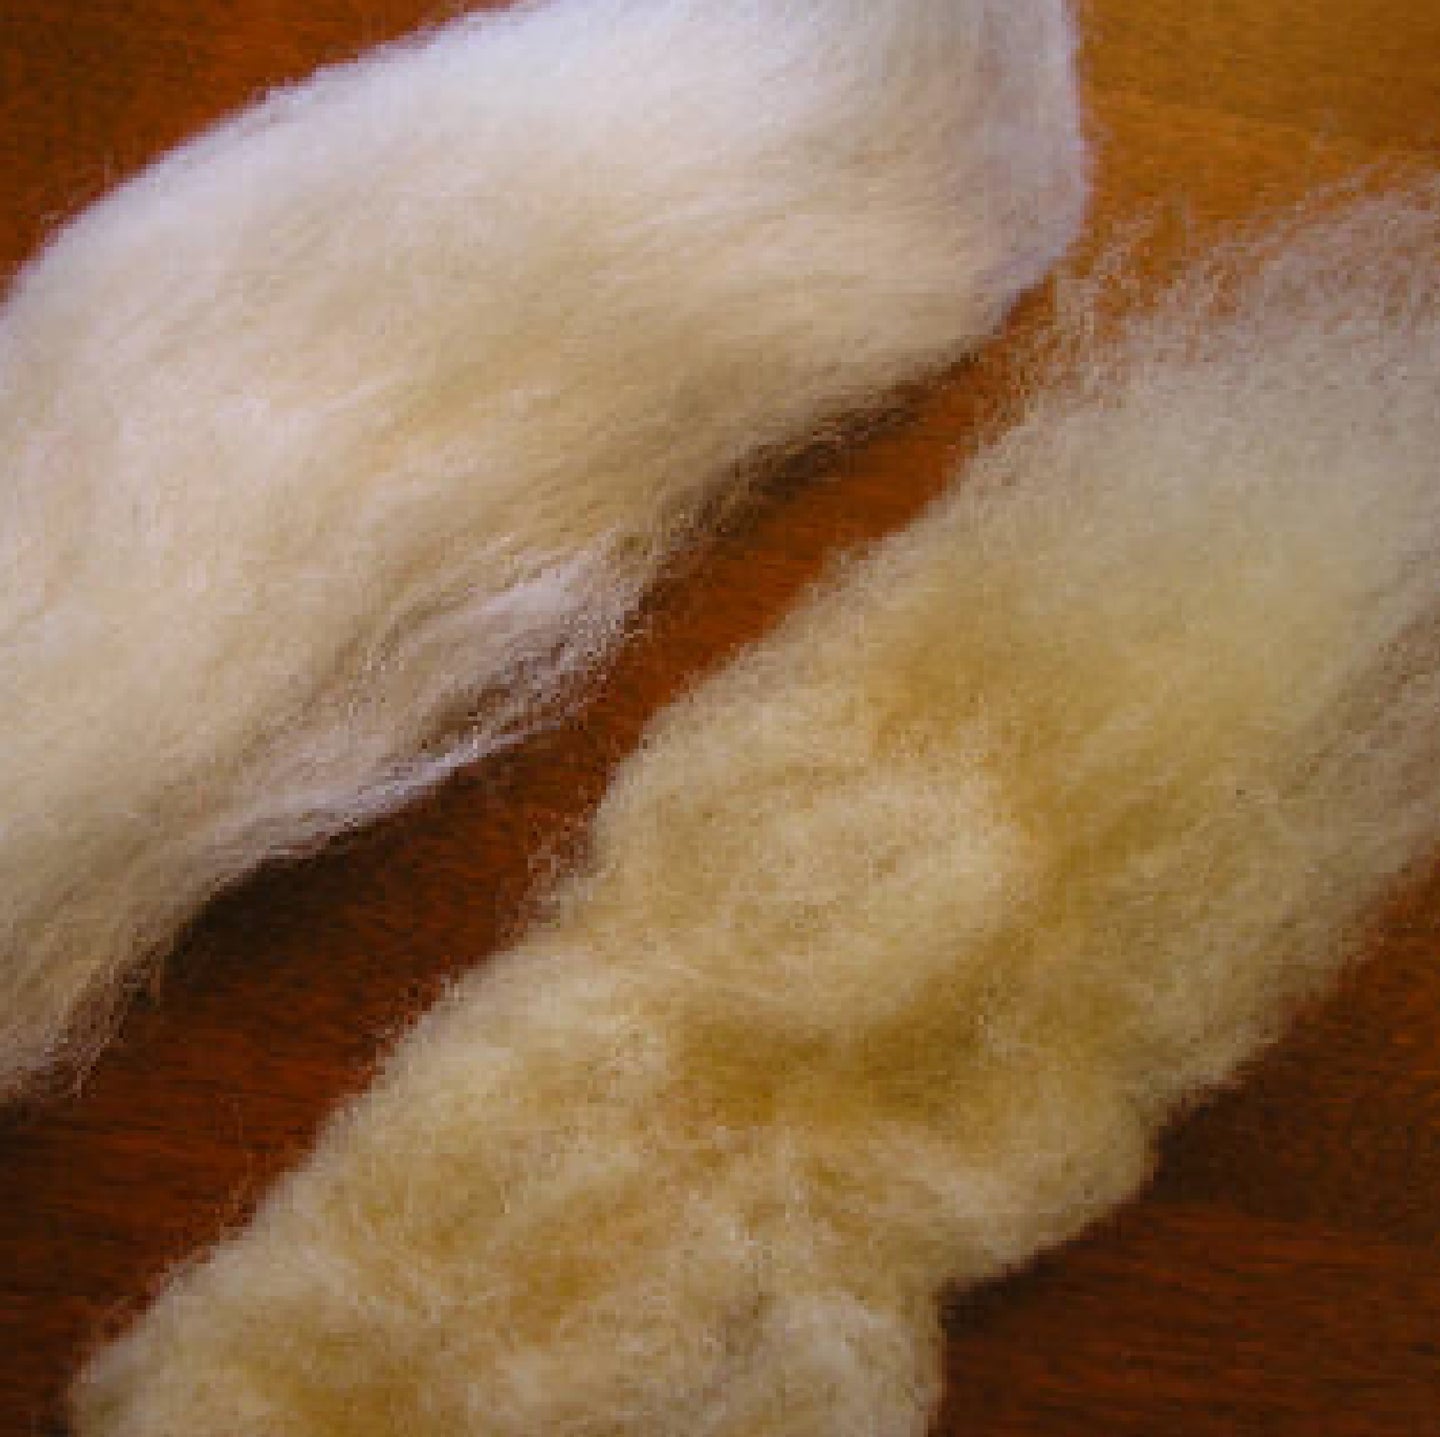 how to coffee dye wool roving for the woolly gnome's beard